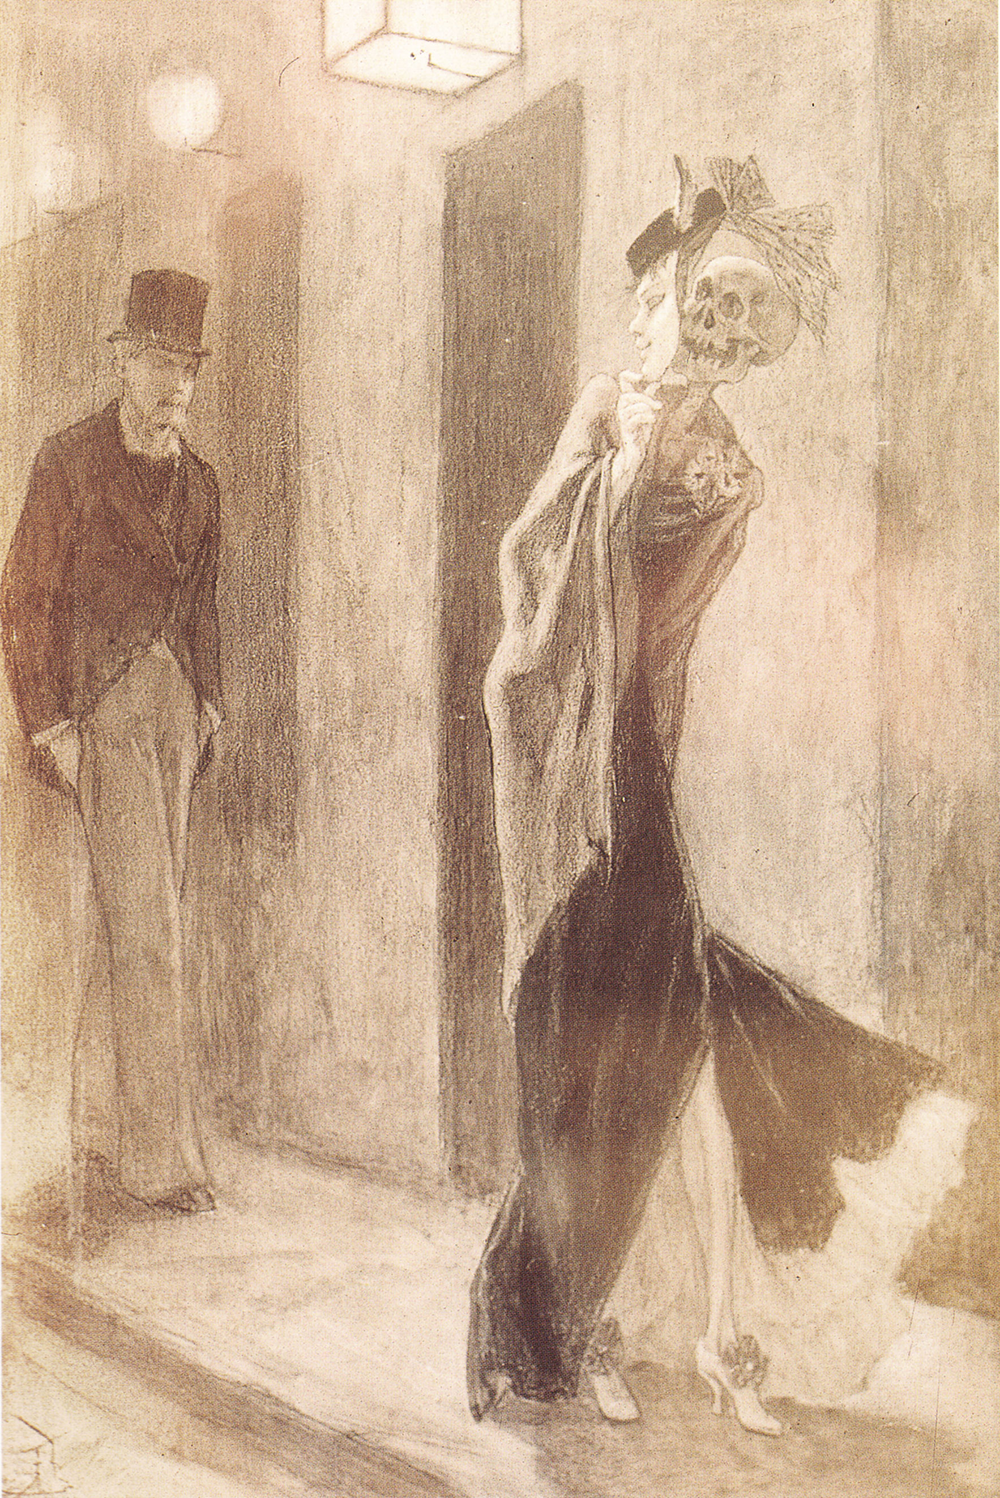 “The Human Parody,” by Félicien Rops, c. 1878–81.